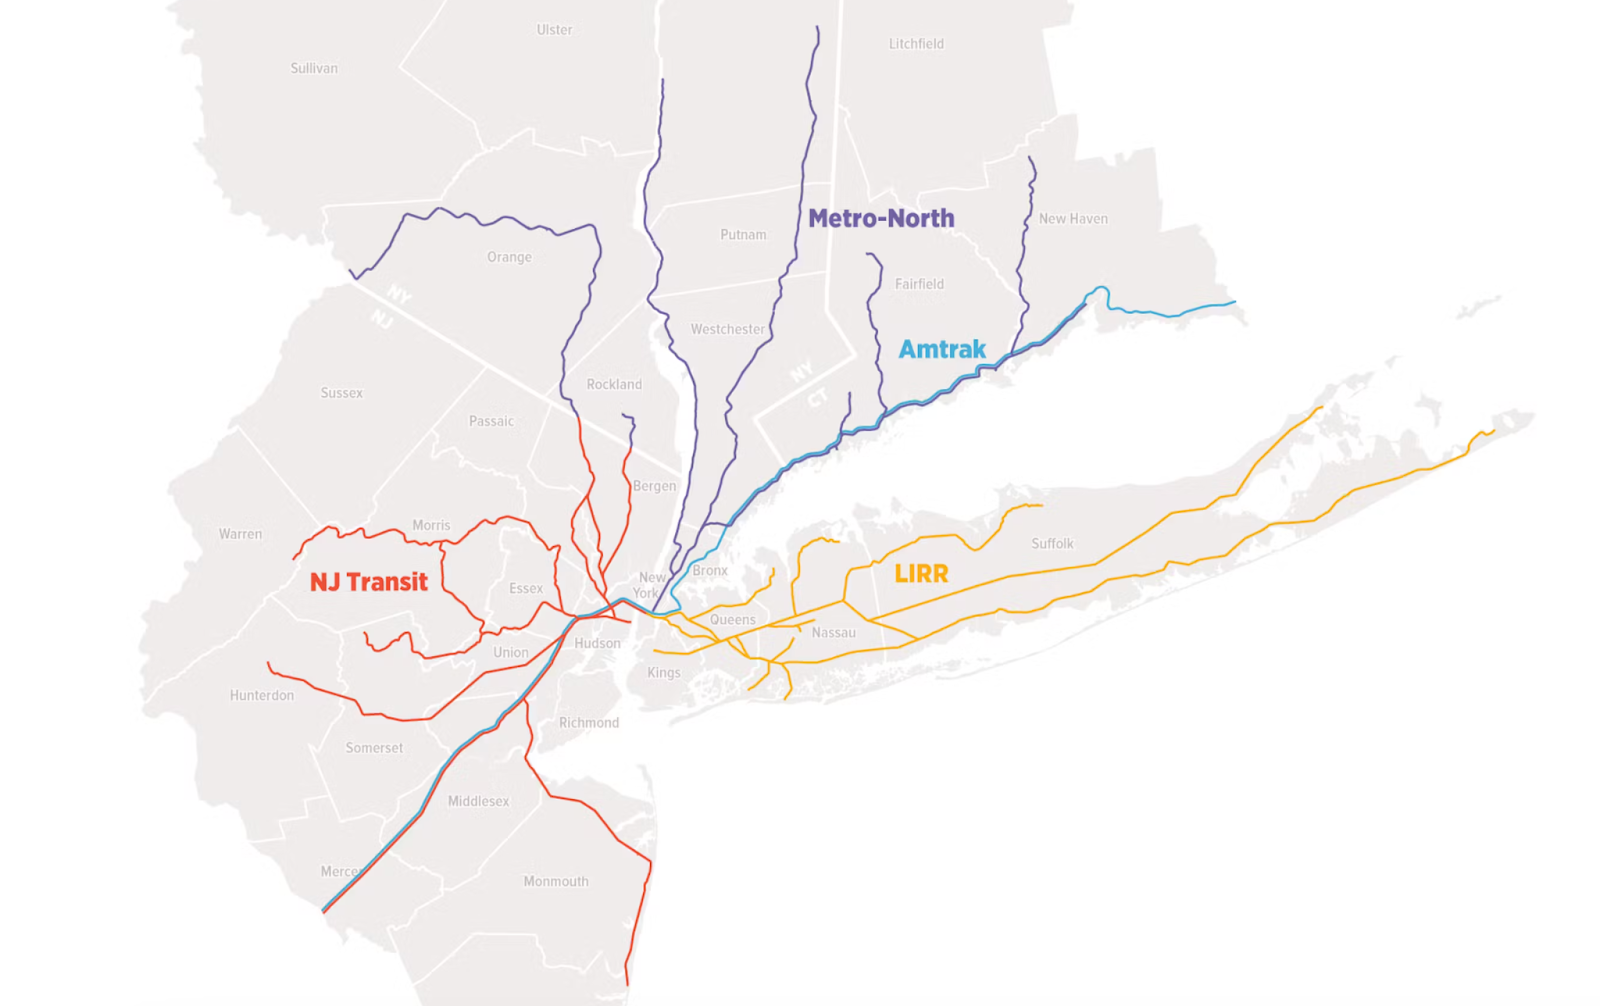 A graphic showing transit networks in the New York, New Jersey, Connecticut region